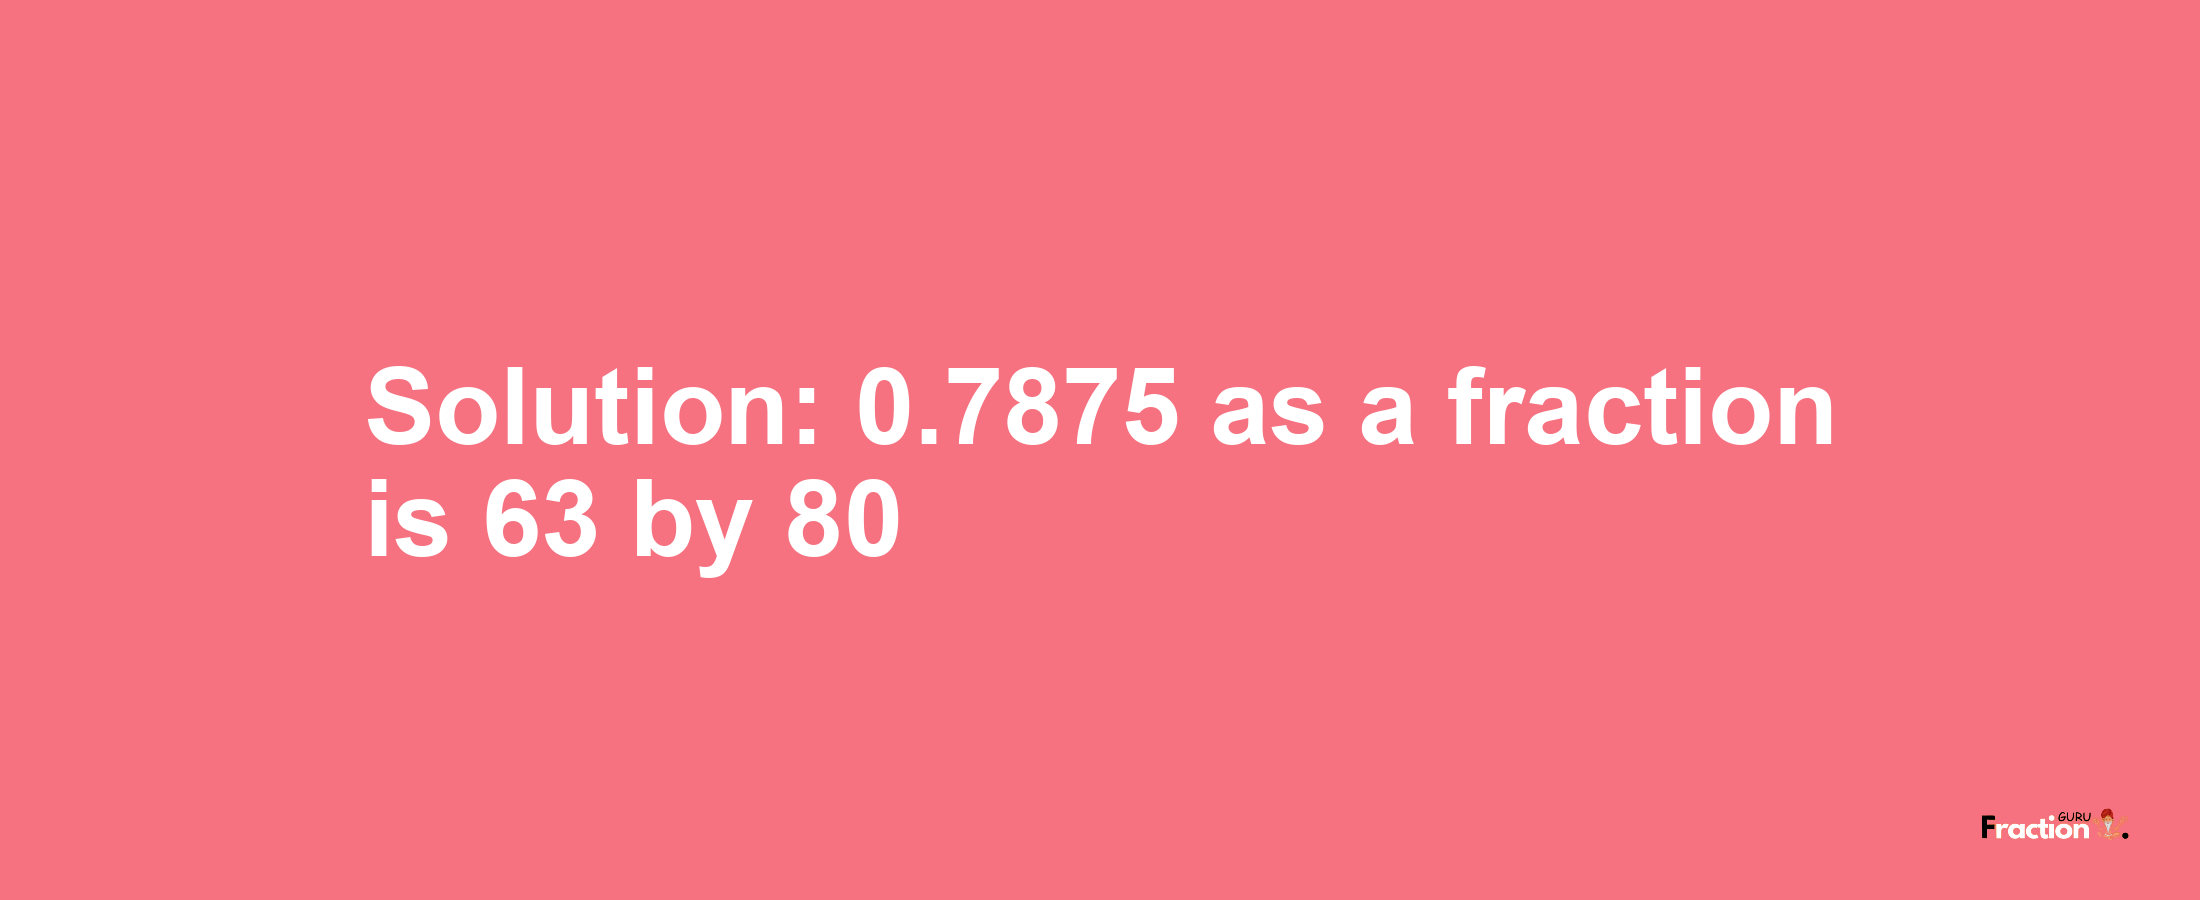 Solution:0.7875 as a fraction is 63/80